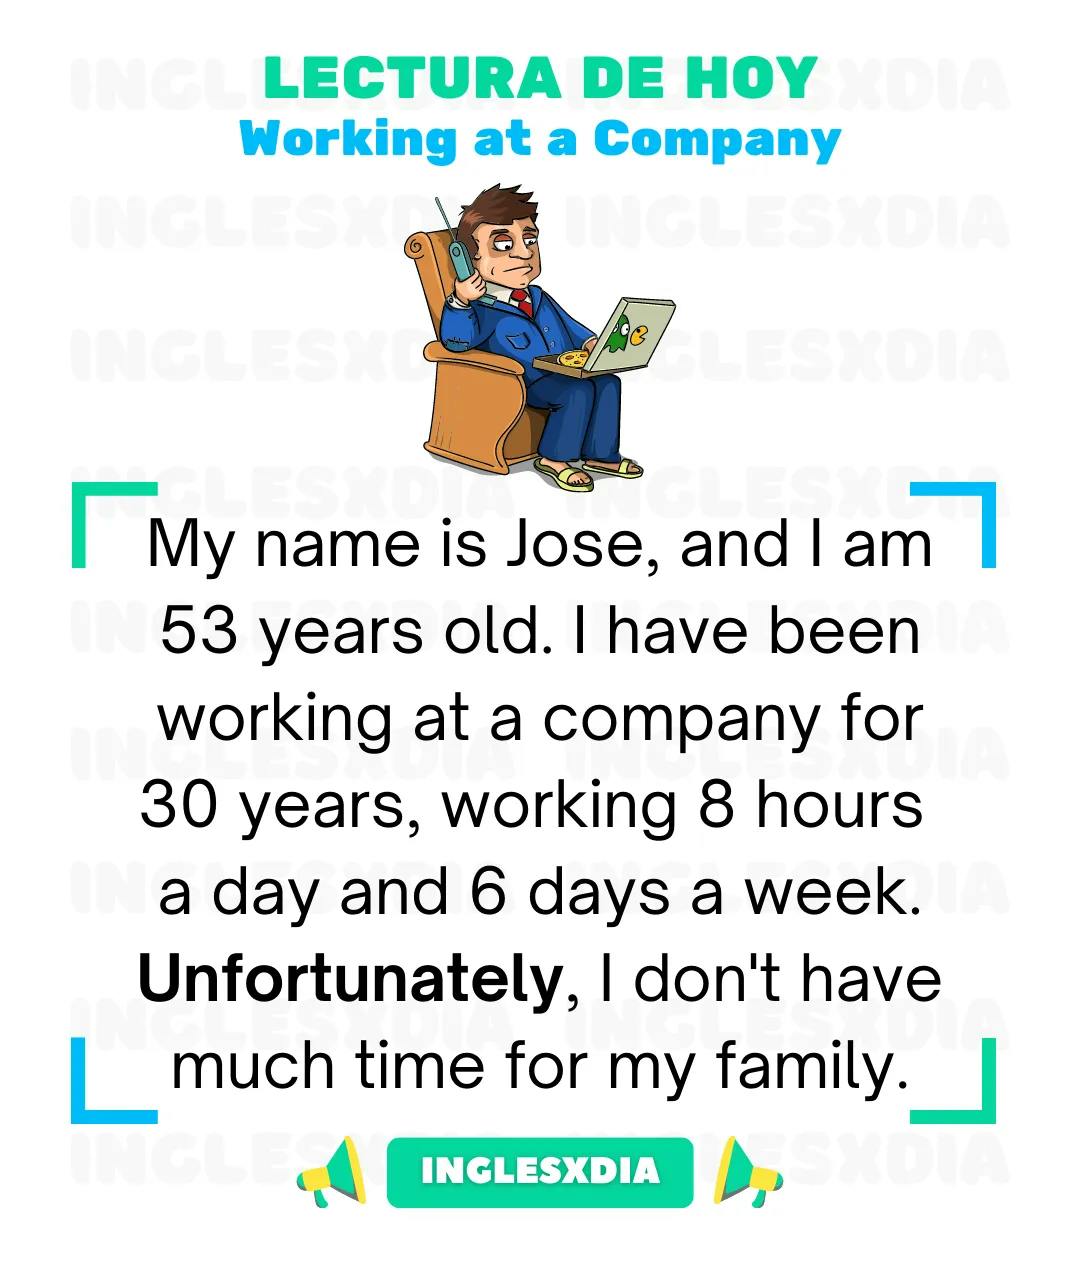 Working at a Company